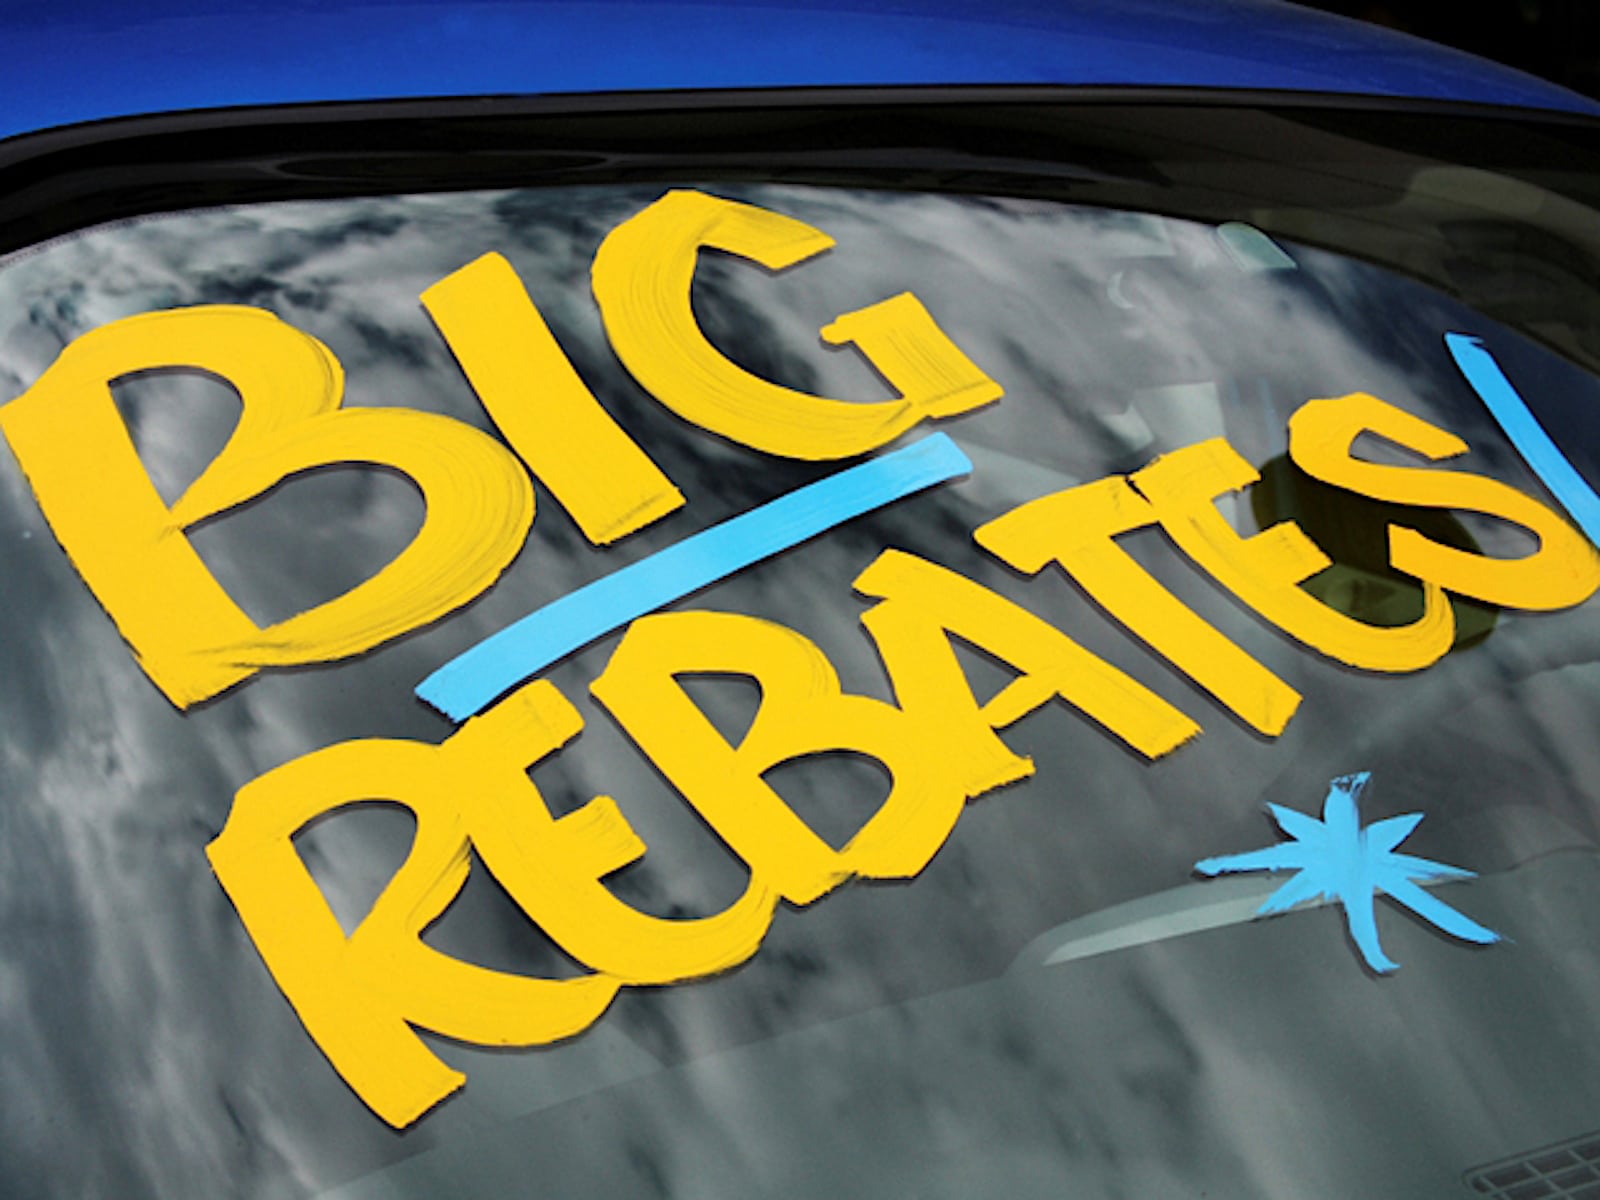 rebates-incentives-may-be-gone-forever-says-autonation-ceo-the-detroit-bureau